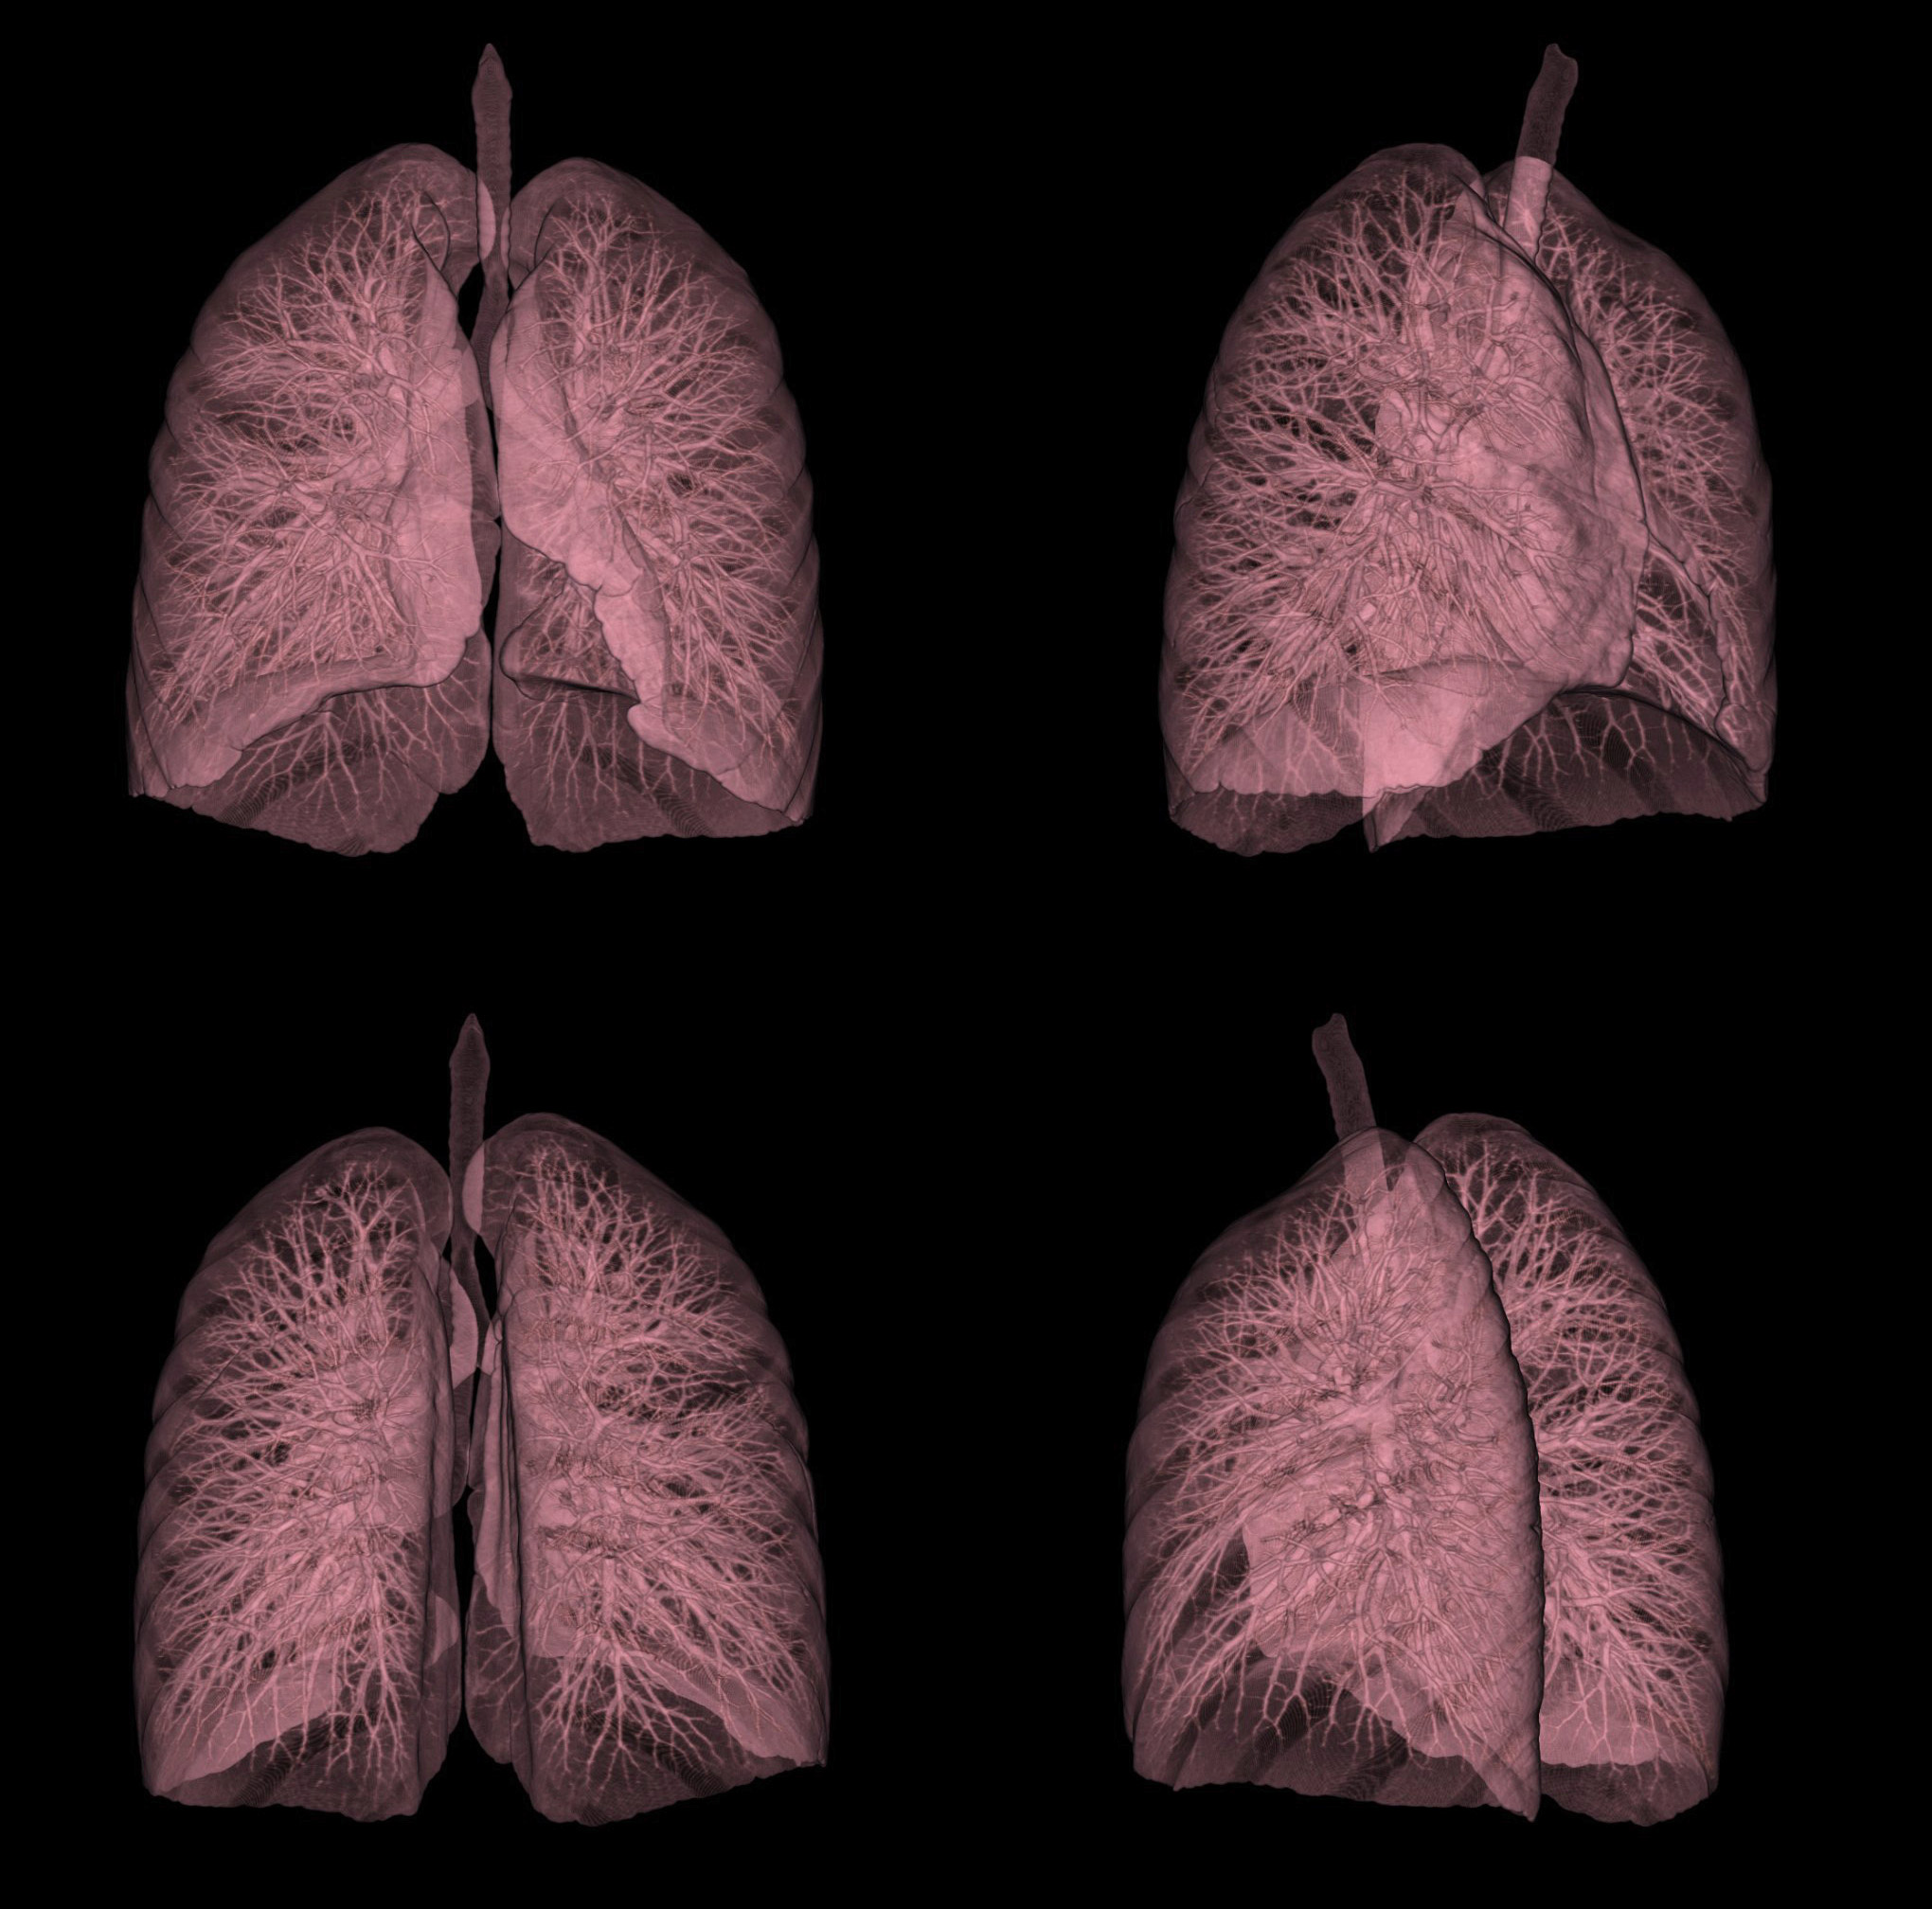 CT Screening Significantly Lung Mortality | Institutes Health (NIH)